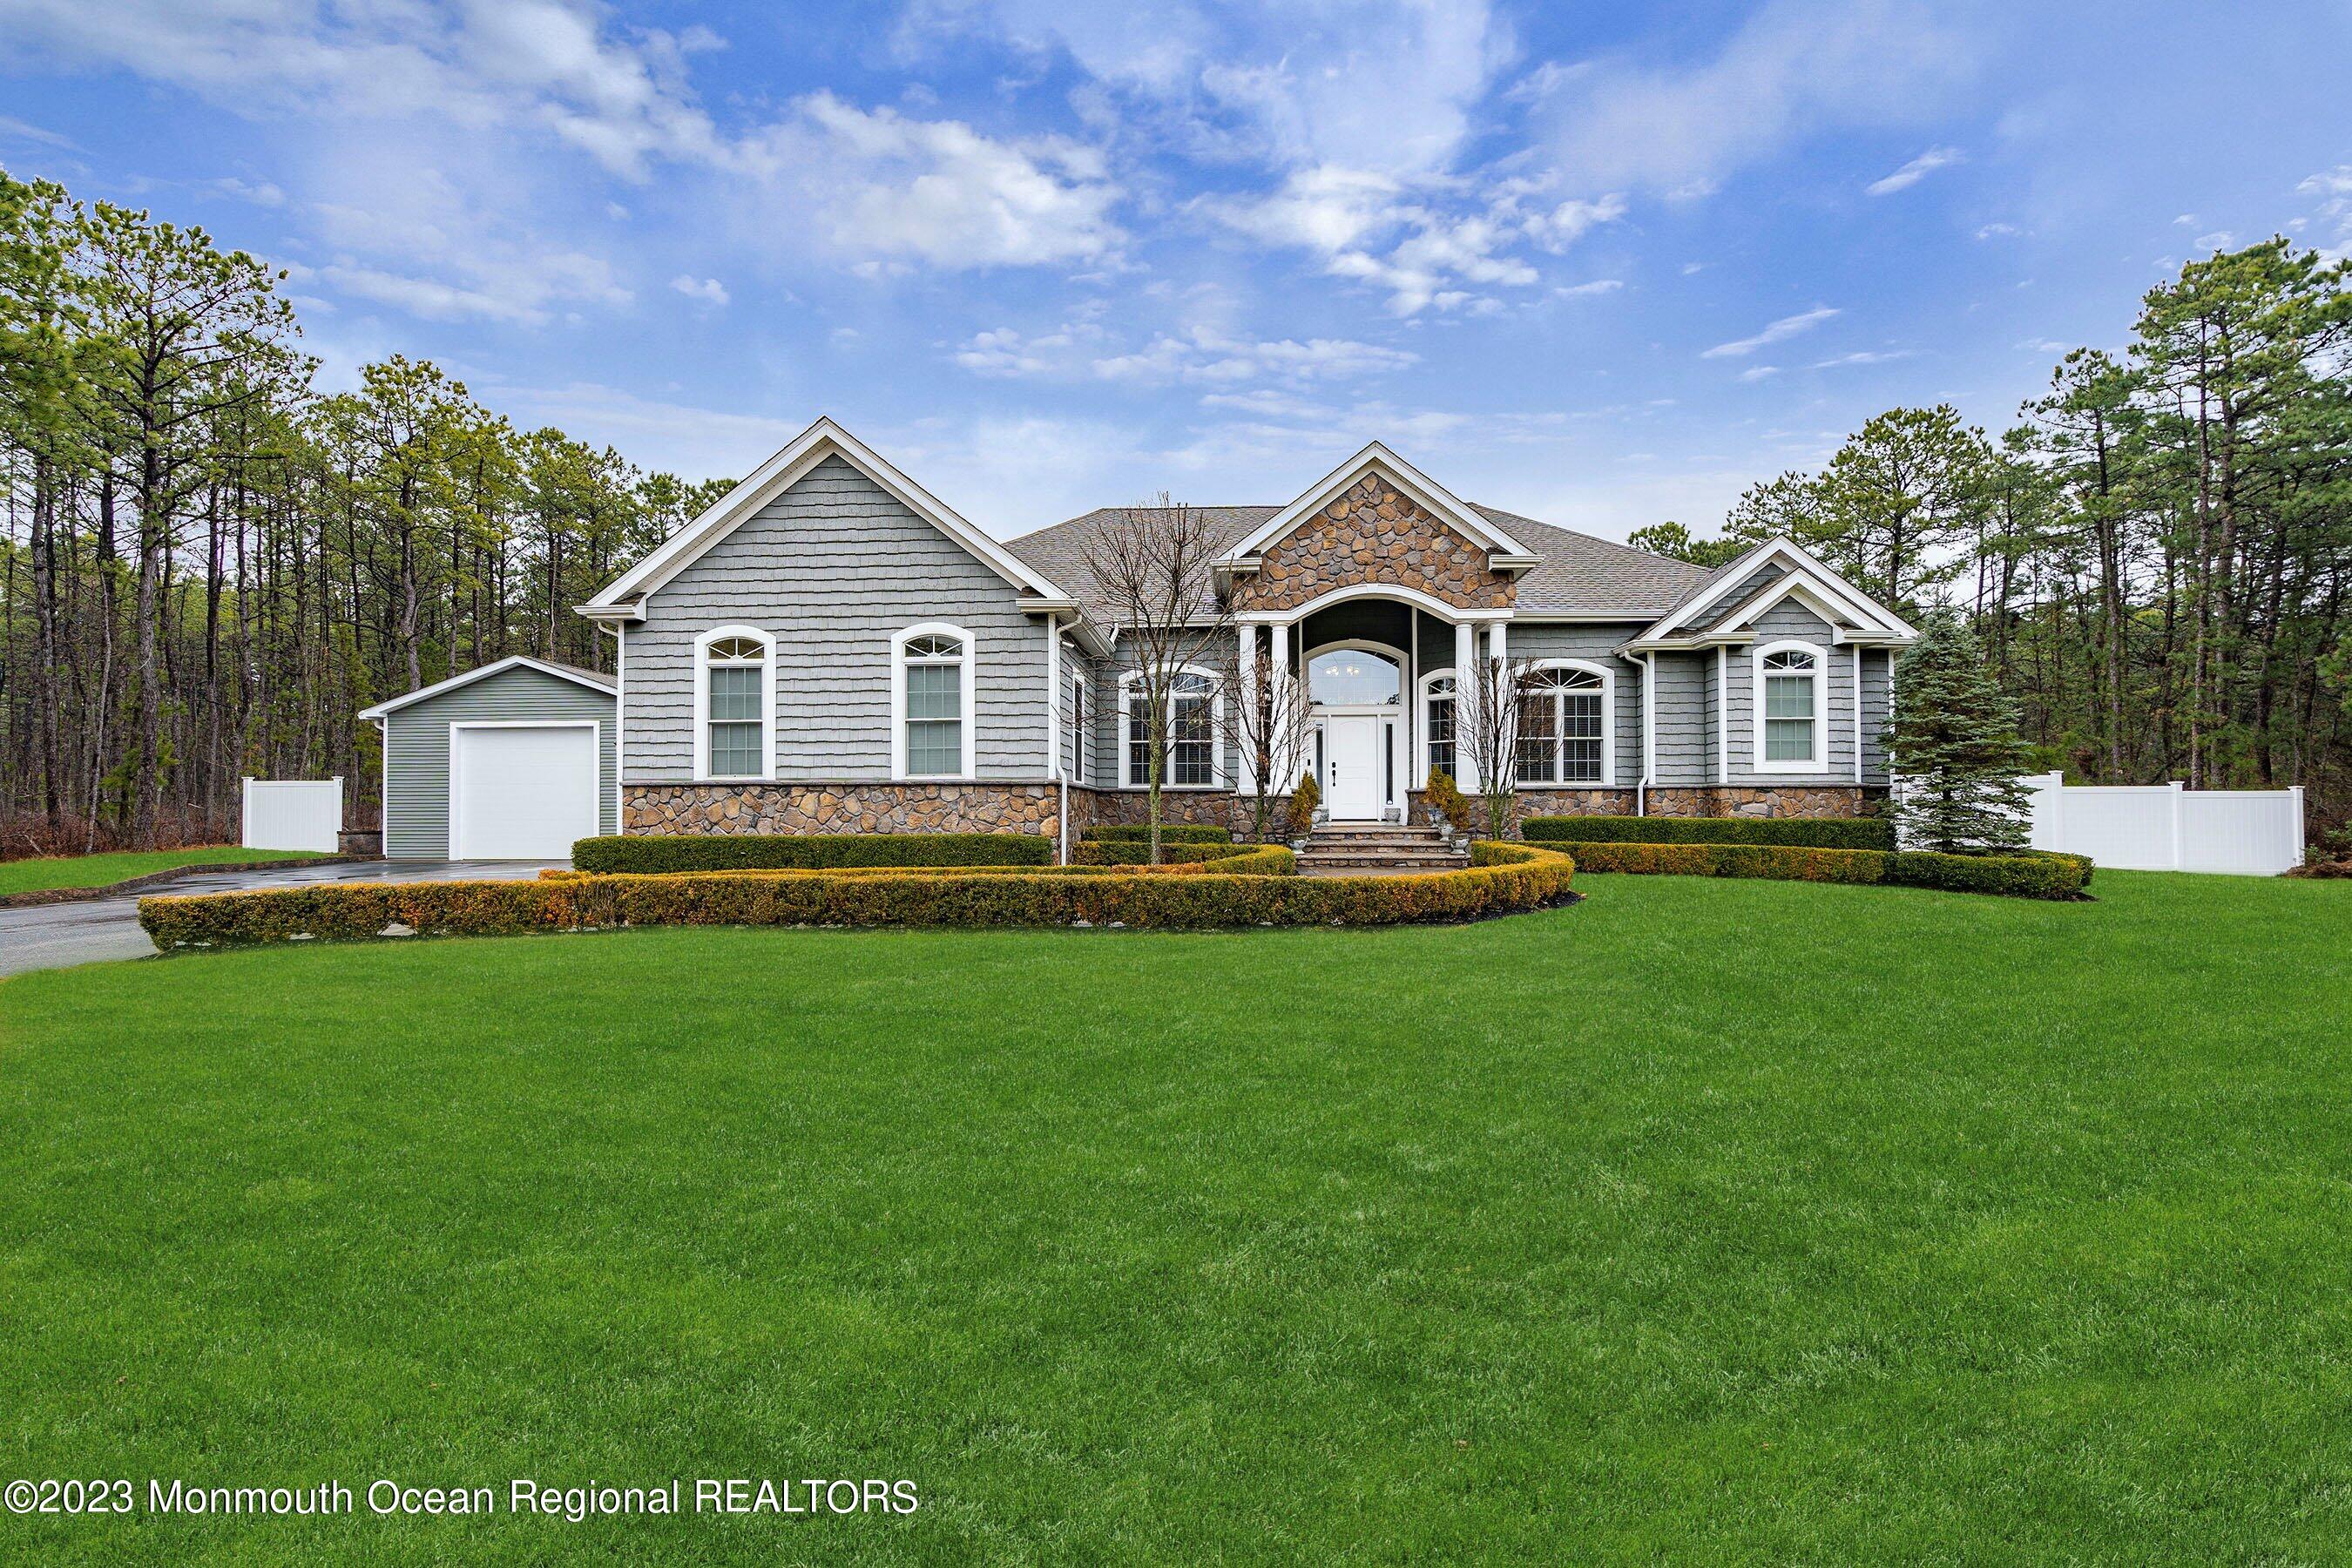 Whiting, NJ Real Estate Housing Market & Trends | Better Homes and Gardens<sup>®</sup> Real Estate